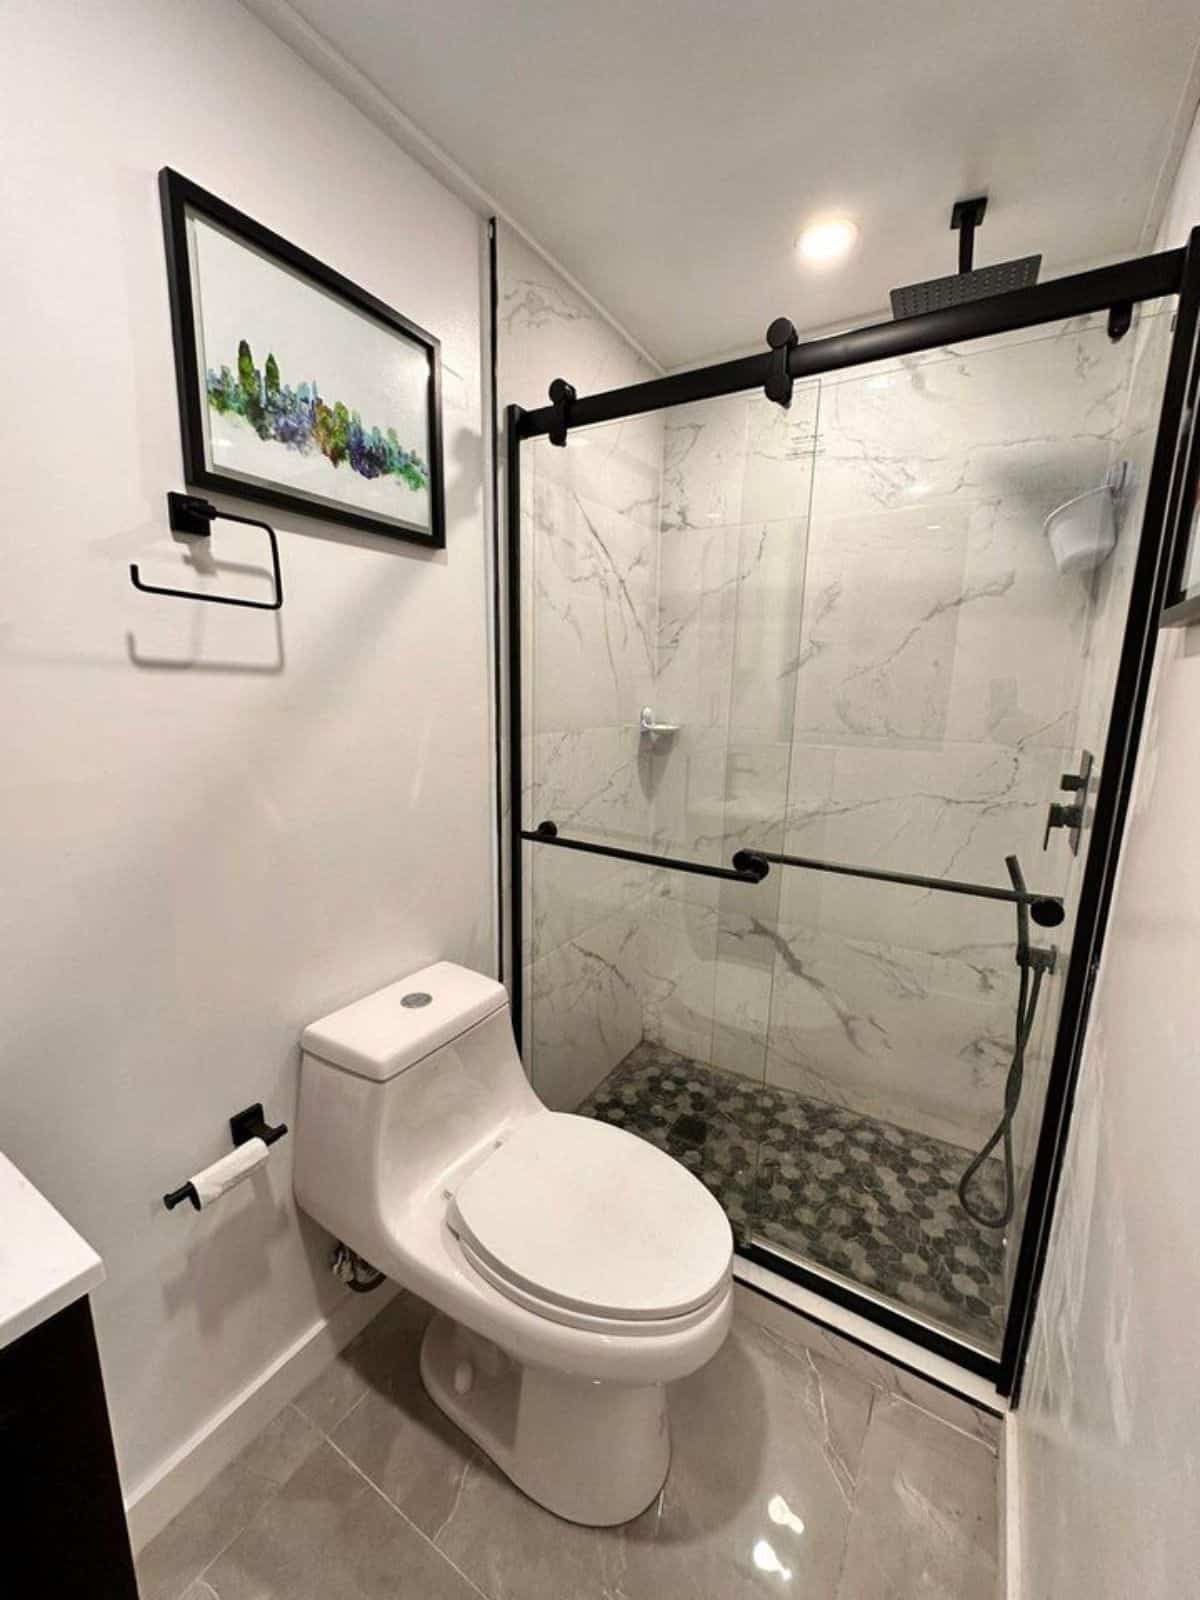 separate shower area with glass enclosure in bathroom of budget tiny home